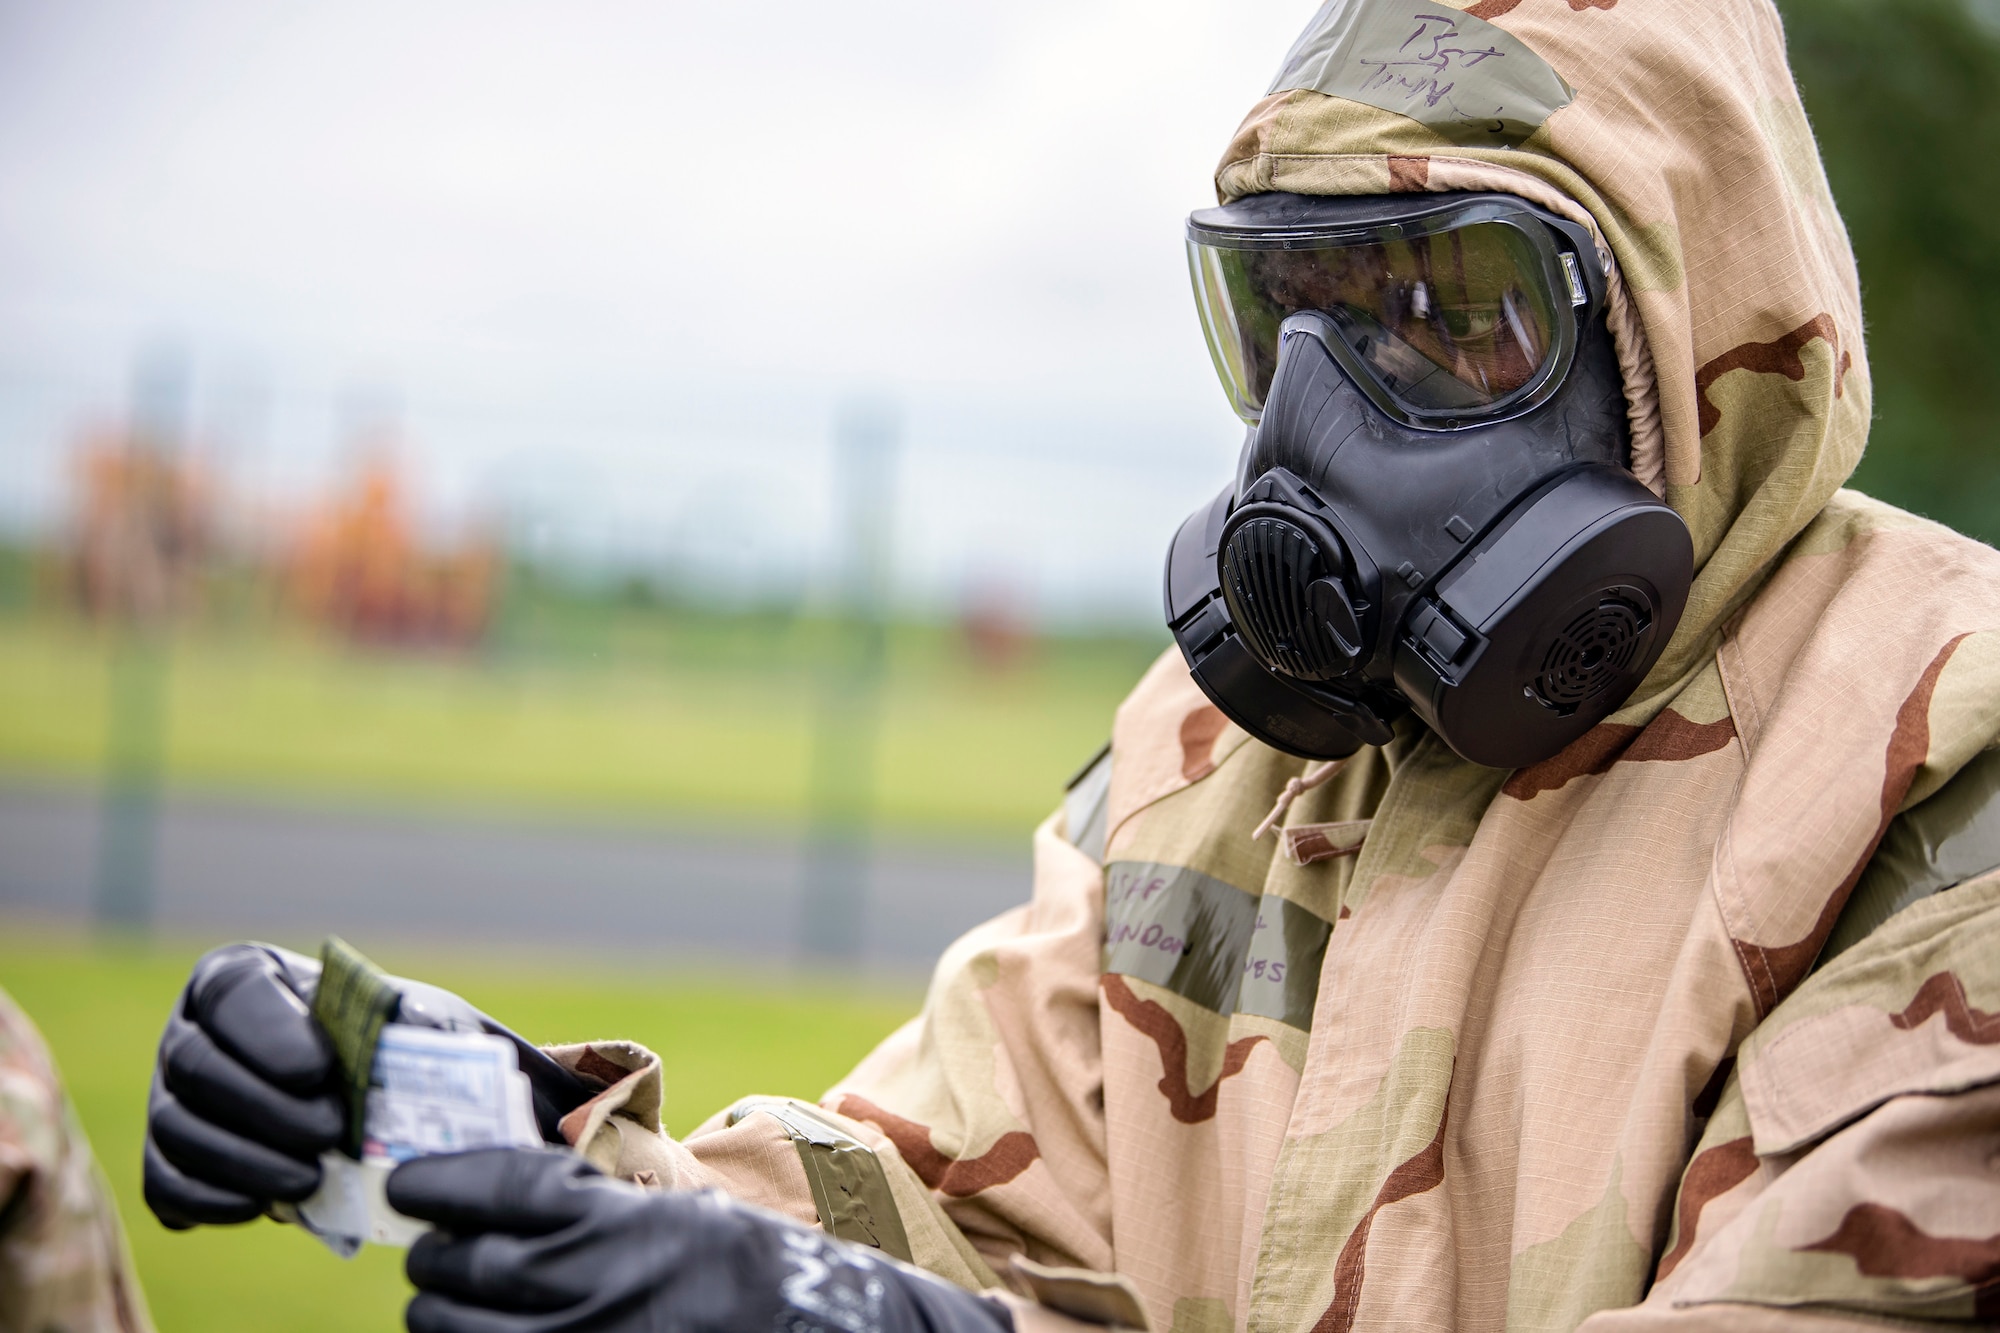 Master Sgt. Brandon Townes, left, 423d Civil Engineer Squadron section chief holds a M256 kit during an exercise at RAF Alconbury, England, May 19, 2022. The exercise was geared towards training Airmen on how to properly control and examine a contaminated area after a simulated chemical attack while in Mission Oriented Protective Posture Gear. (U.S. Air Force photo by Staff Sgt. Eugene Oliver)